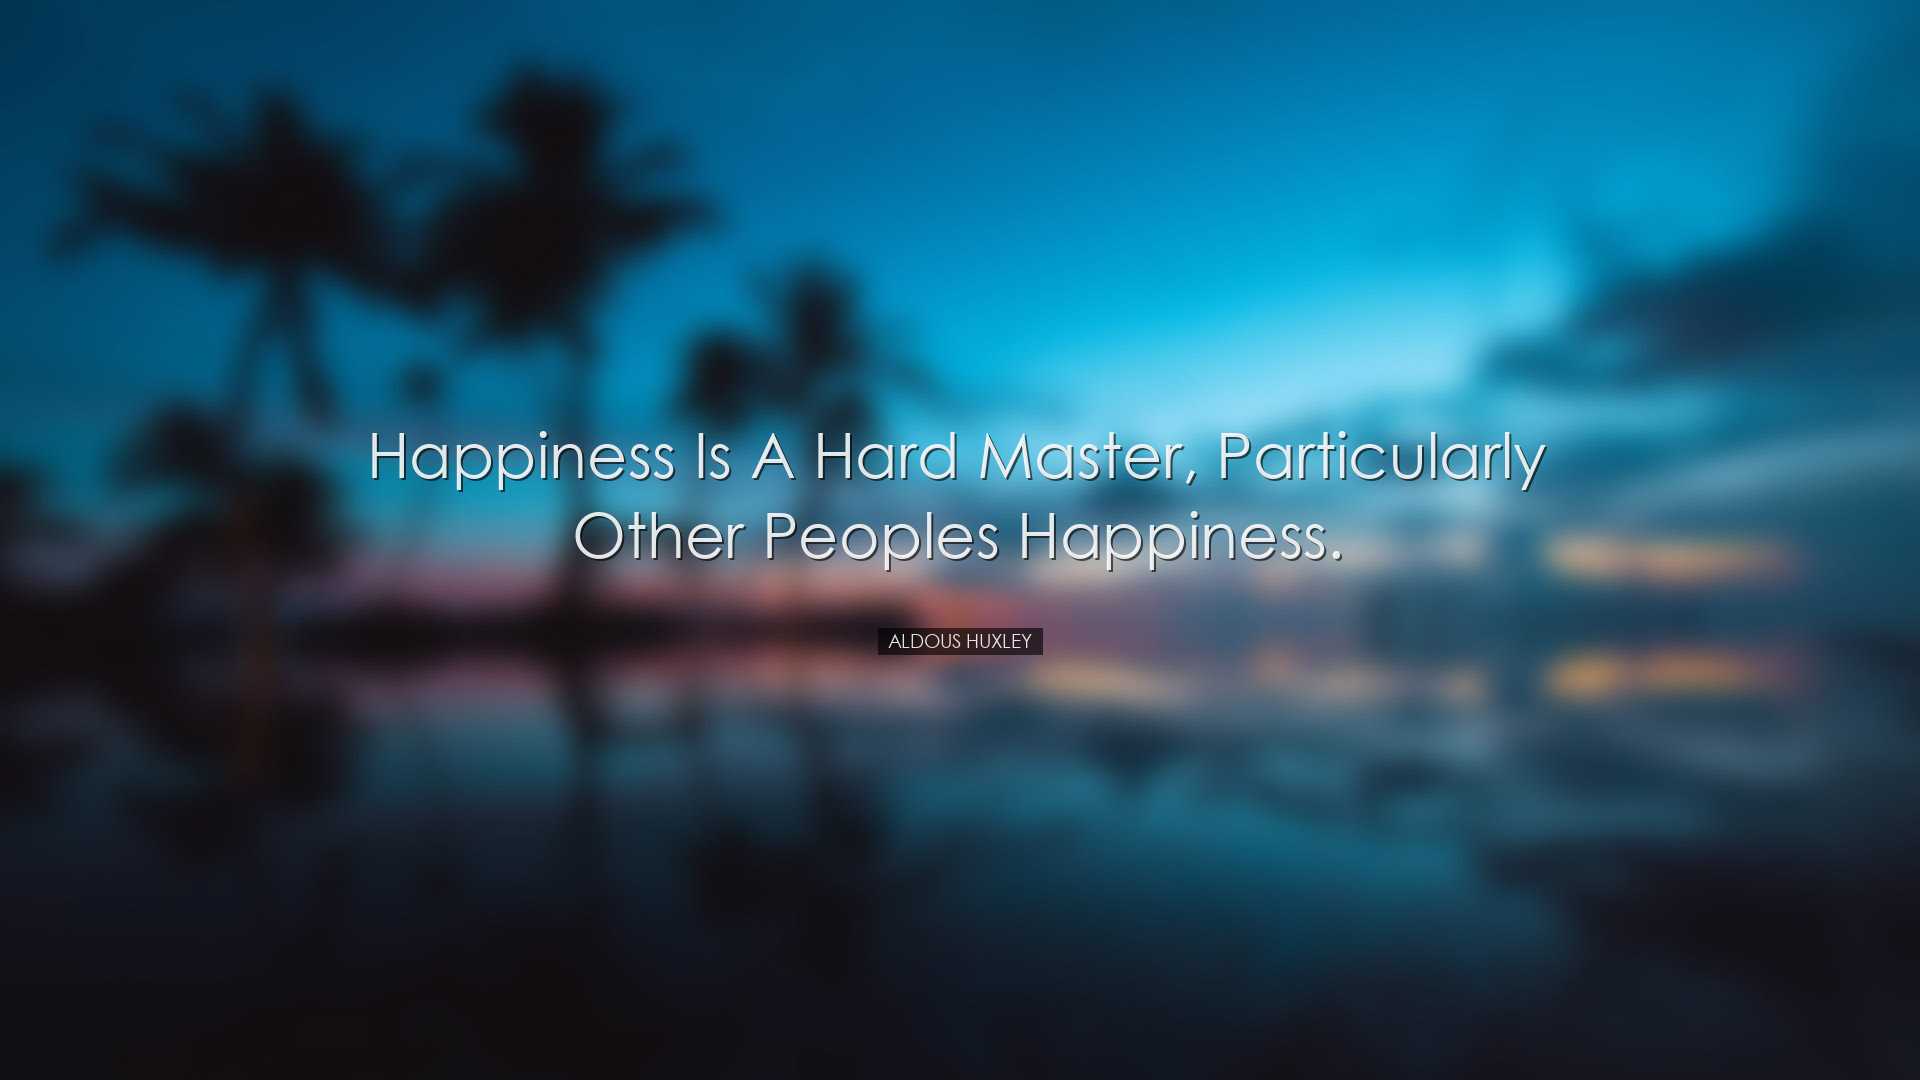 Happiness is a hard master, particularly other peoples happiness.